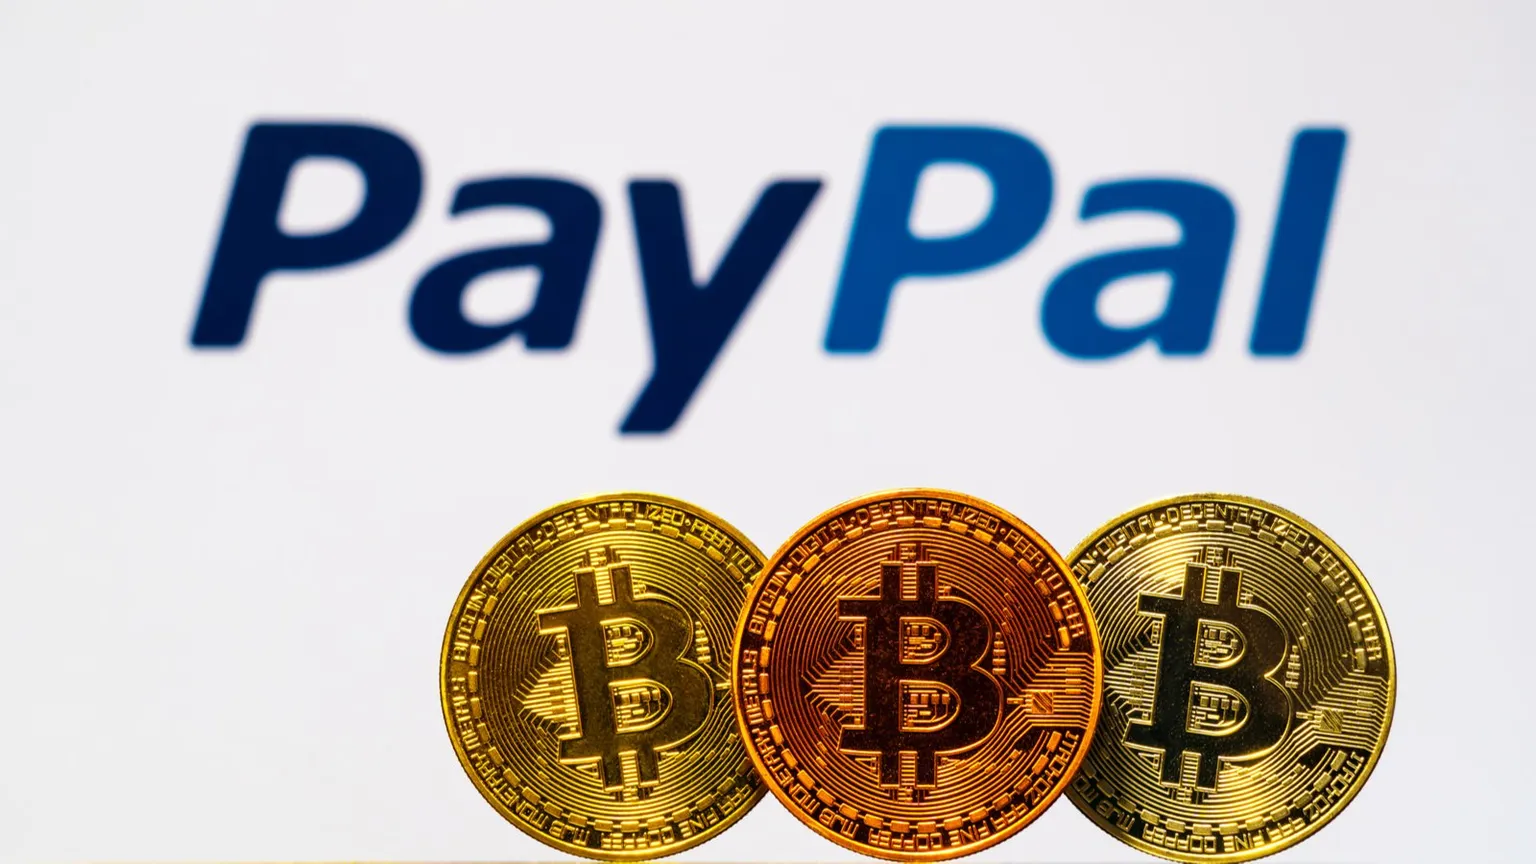 PayPal users can purchase Bitcoin on the platform. Image: Shutterstock